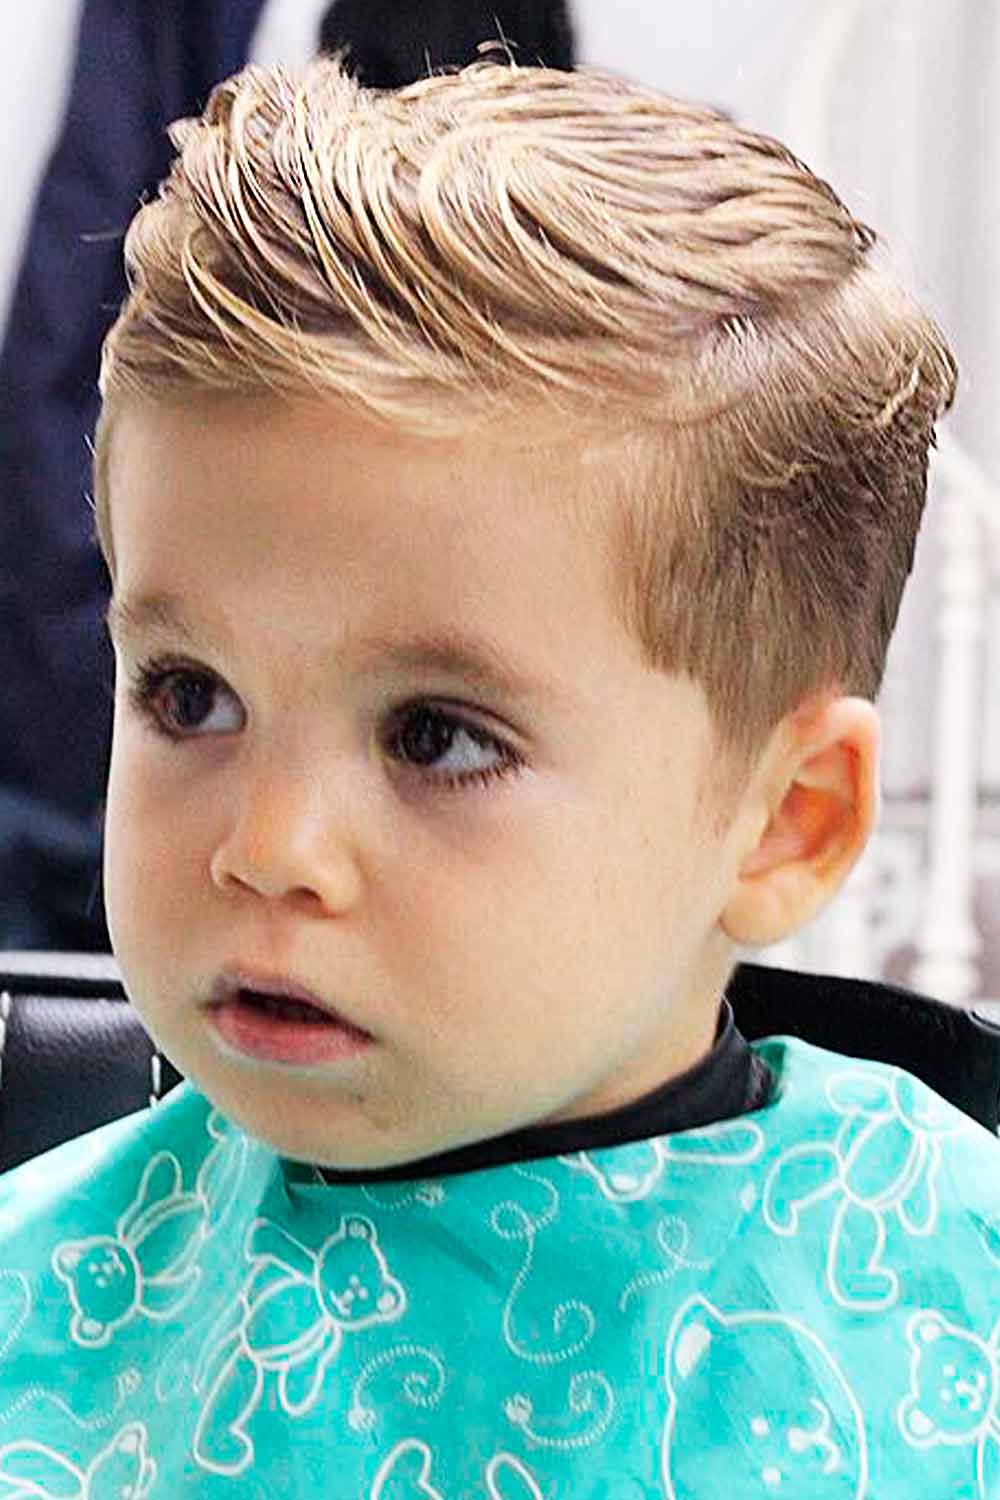 Baby's First Haircut - YouTube